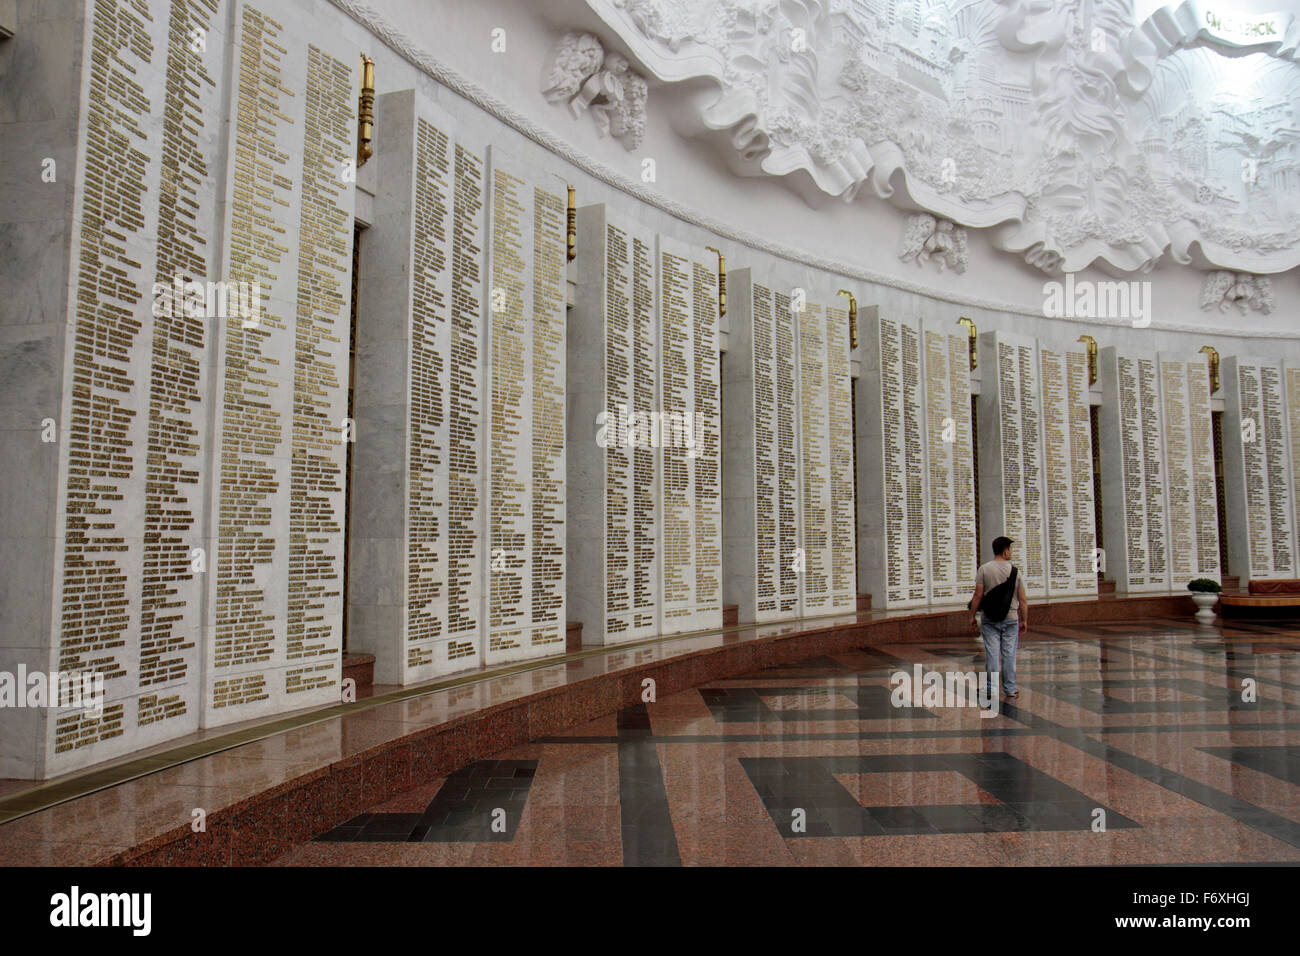 Names of some Heroes of the Soviet Union in the 'Hall of Glory, Museum of the Great Patriotic War, Park Pobedy, Moscow, Russia. Stock Photo